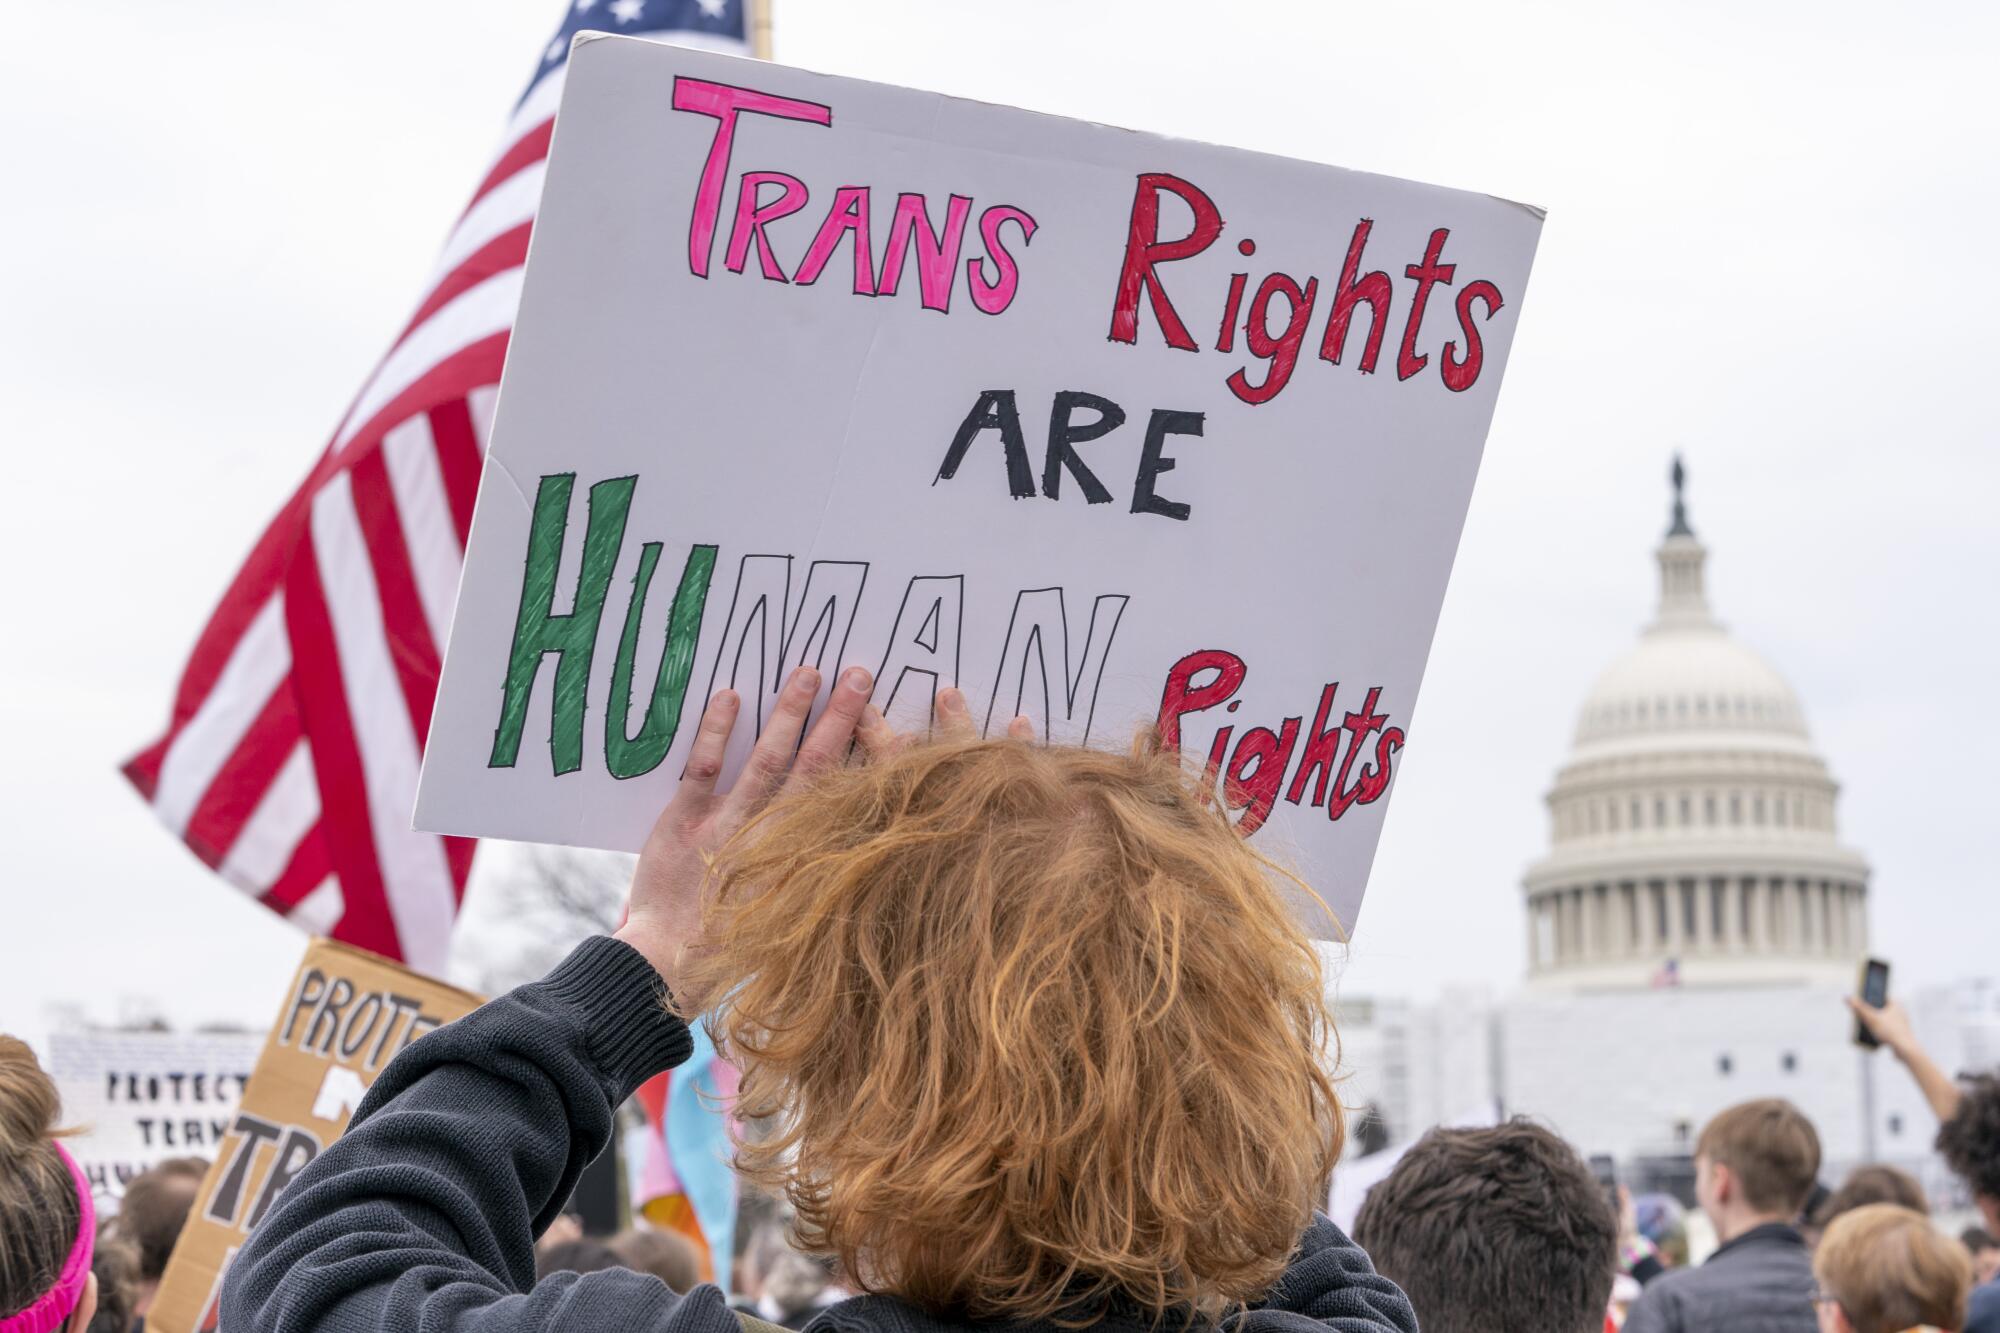 A person at a rally holds a sign that says, "Trans rights are human rights."